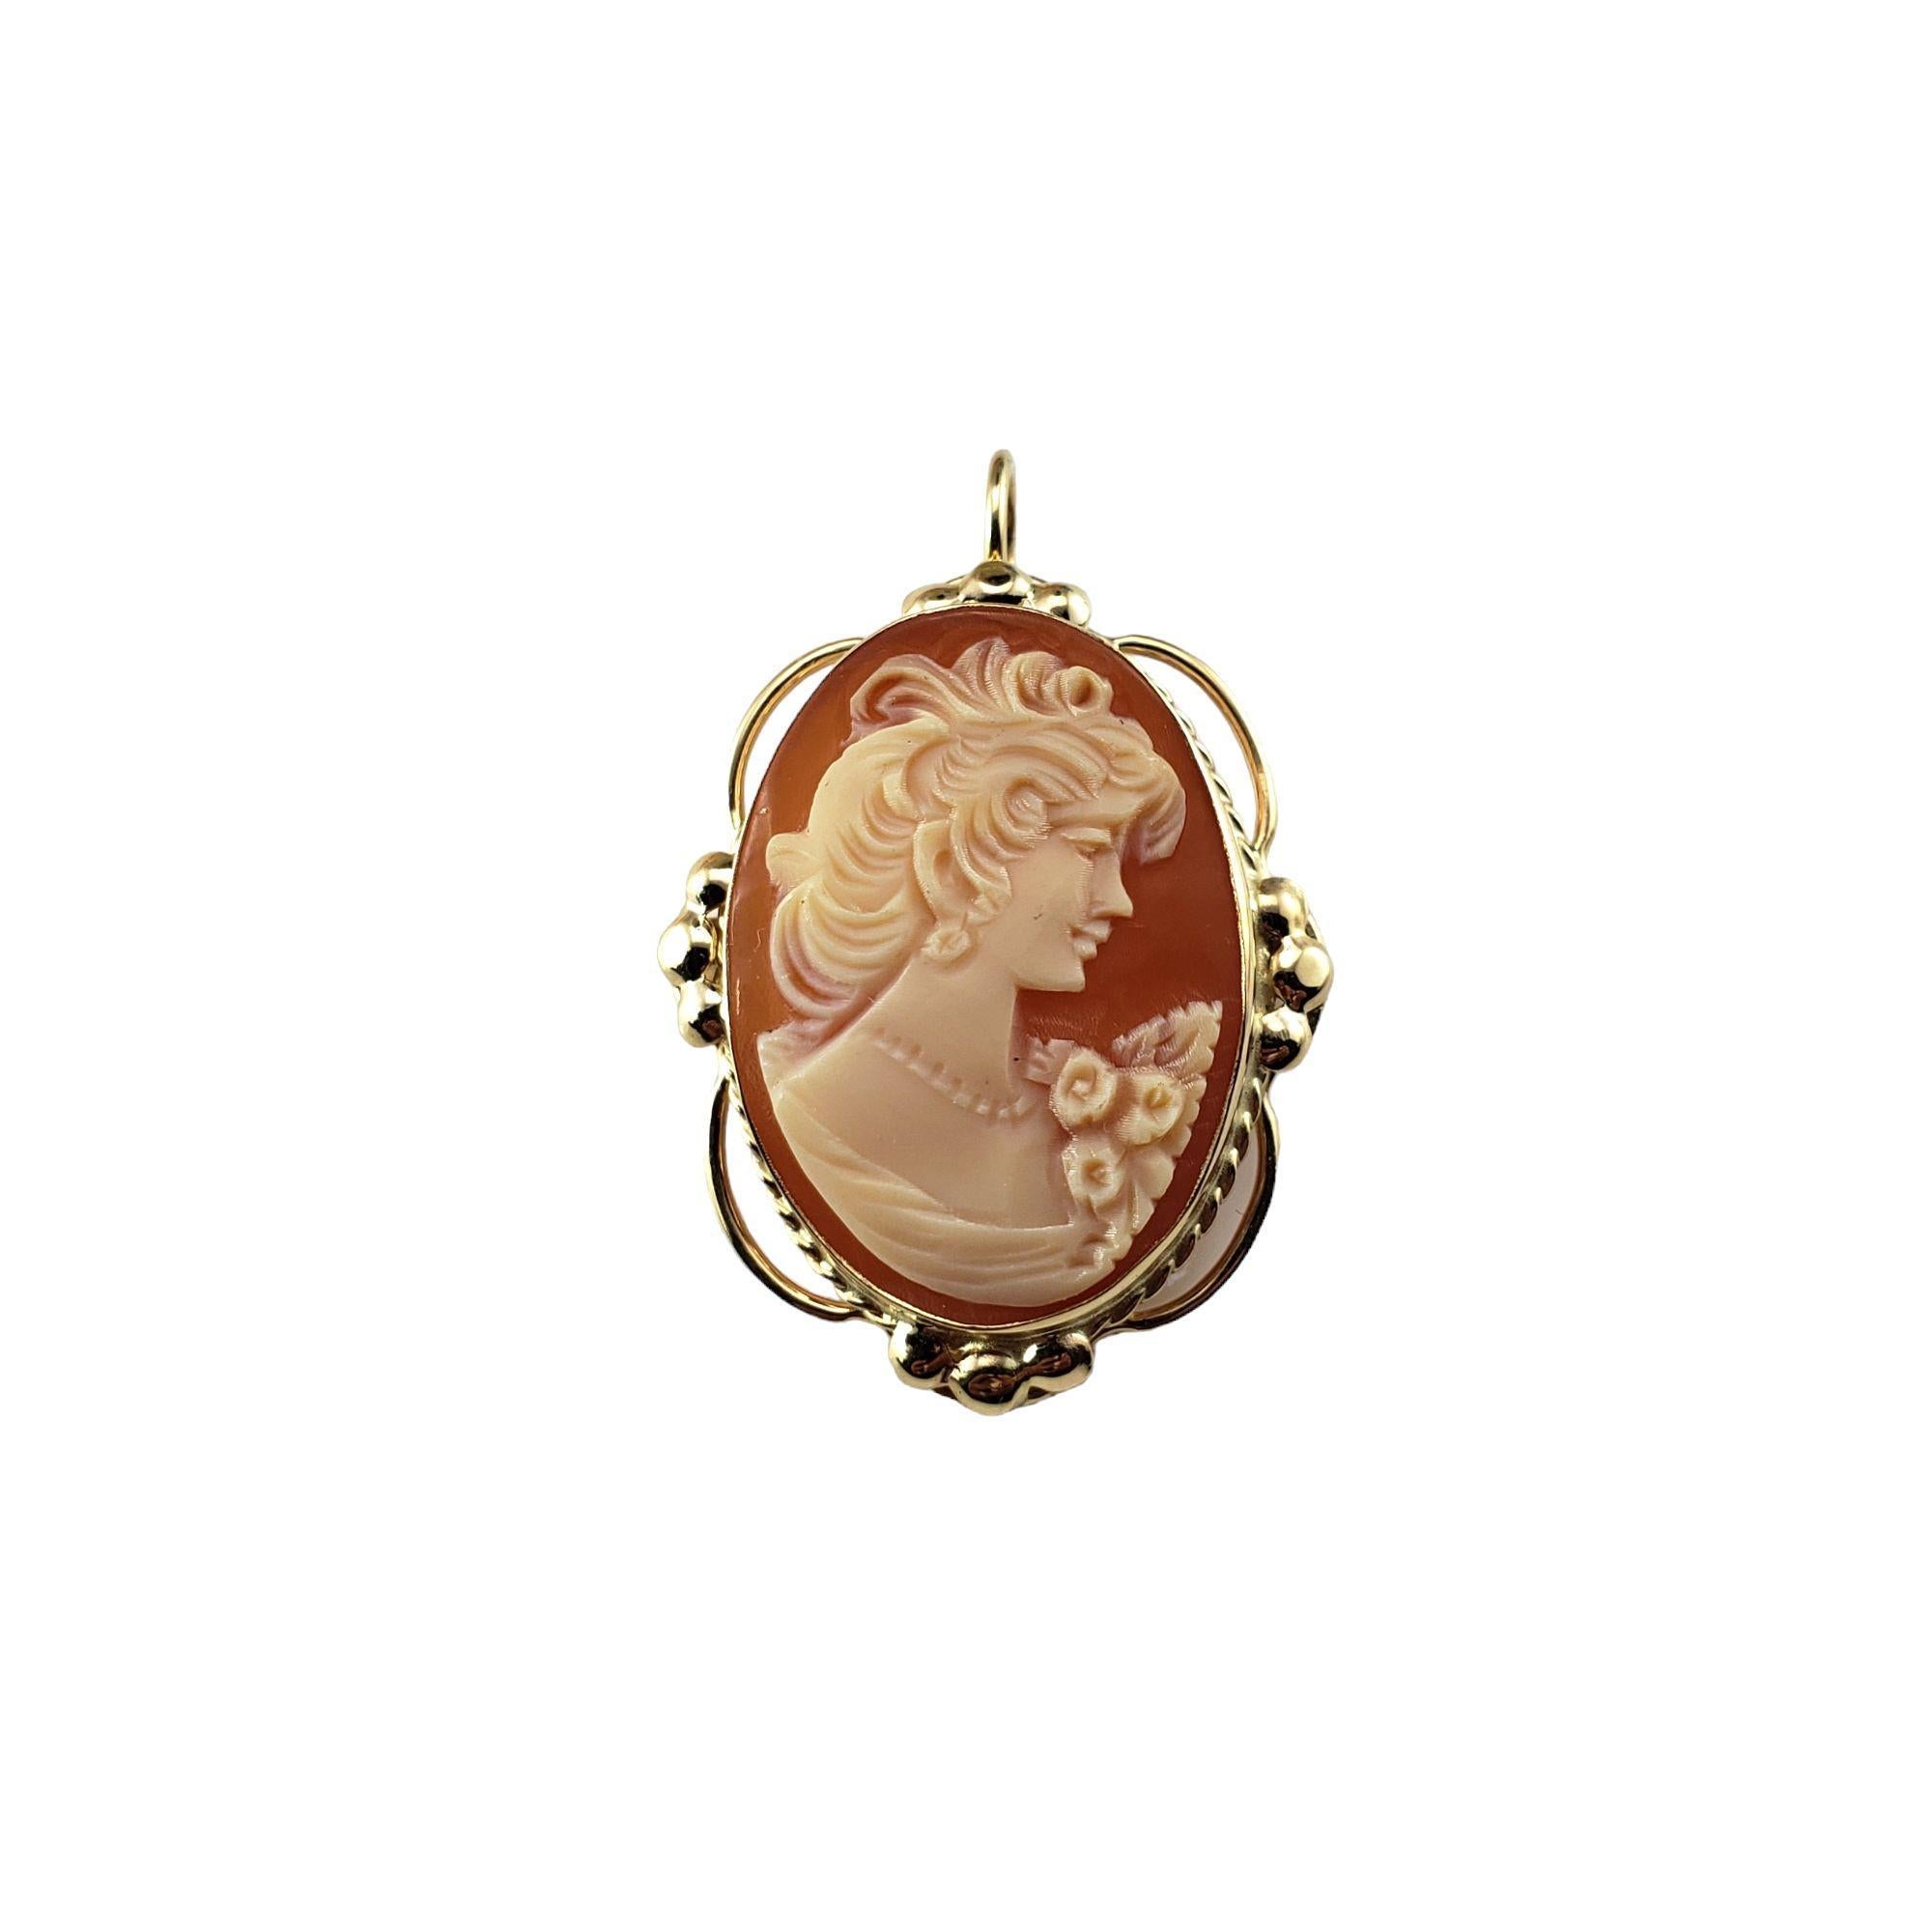 10 Karat Yellow Gold Cameo Brooch/Pendant-

This elegant cameo features a lovely lady in profile set in beautifully detailed 10K yellow gold. Can be worn as a brooch or a pendant.

Size: 37 mm x 24 mm

Weight: 3.3 dwt. / 5.2 gr.

Tested 10K